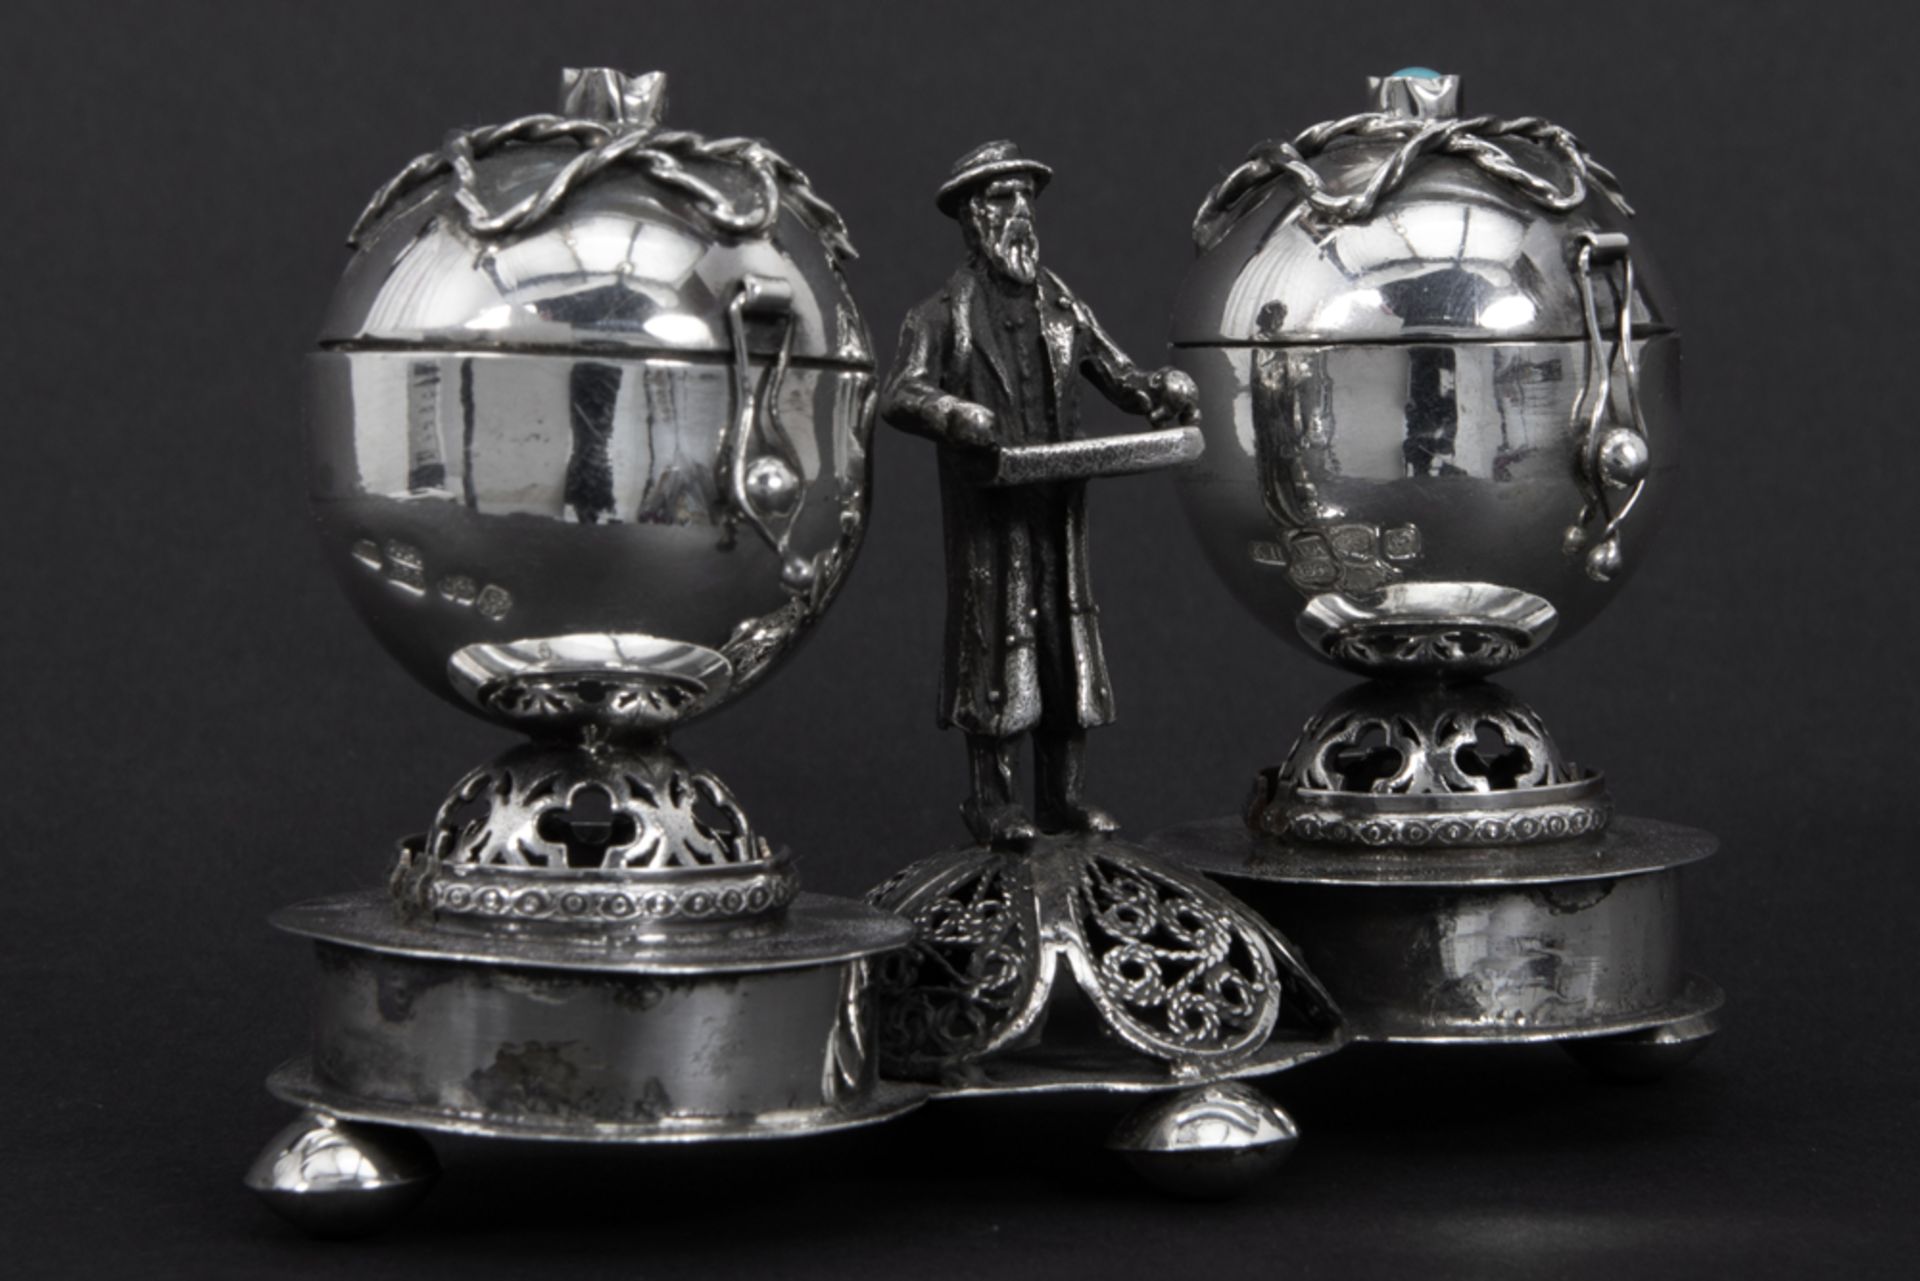 antique Polish salt cellar with two ovoid containers and a standing male figure - in "Warshau 84" - Bild 2 aus 6